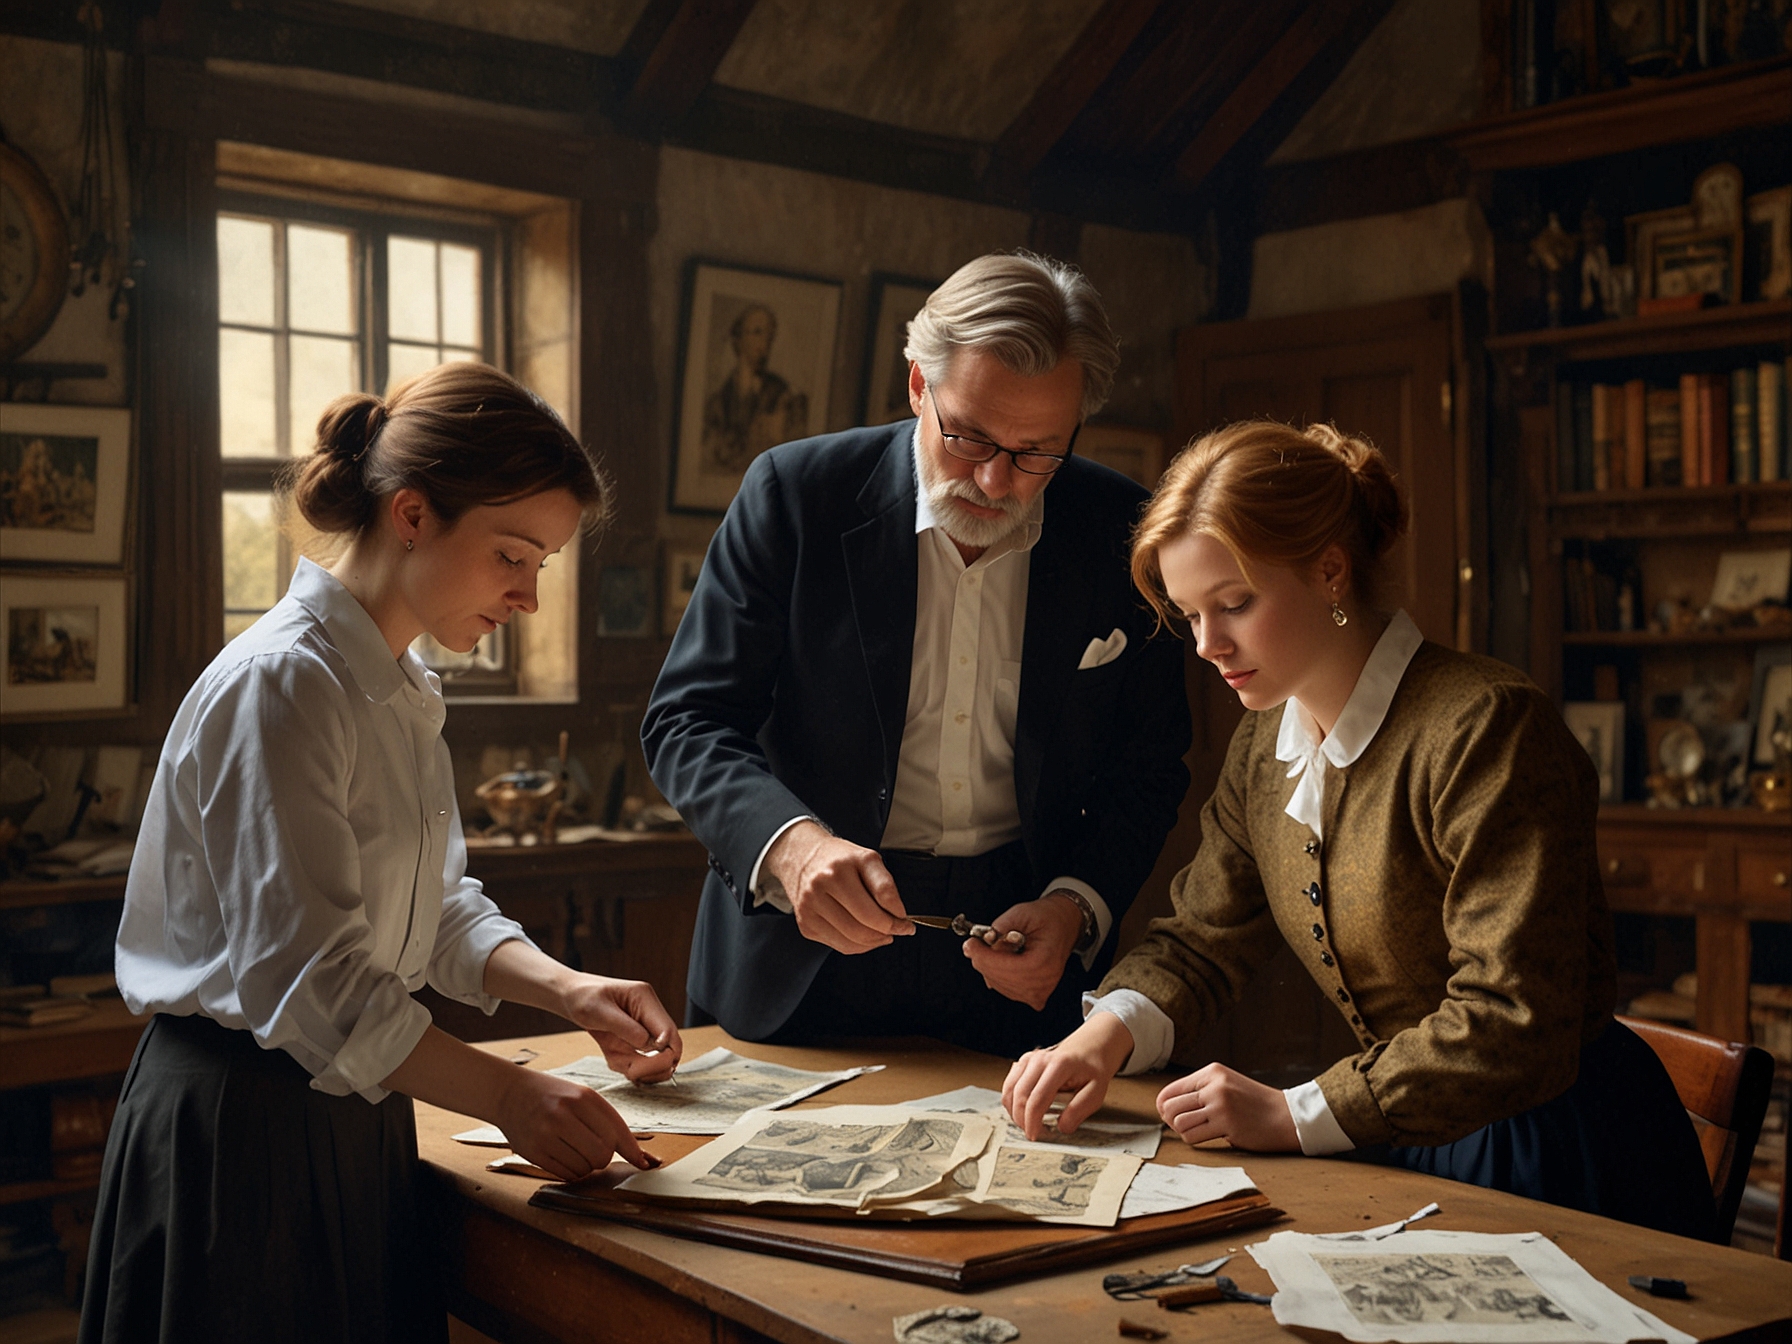 A detailed depiction of art experts examining fragments of the rediscovered Dutch-Irish artwork in a Hague attic, highlighting the pristine condition and intricate details.